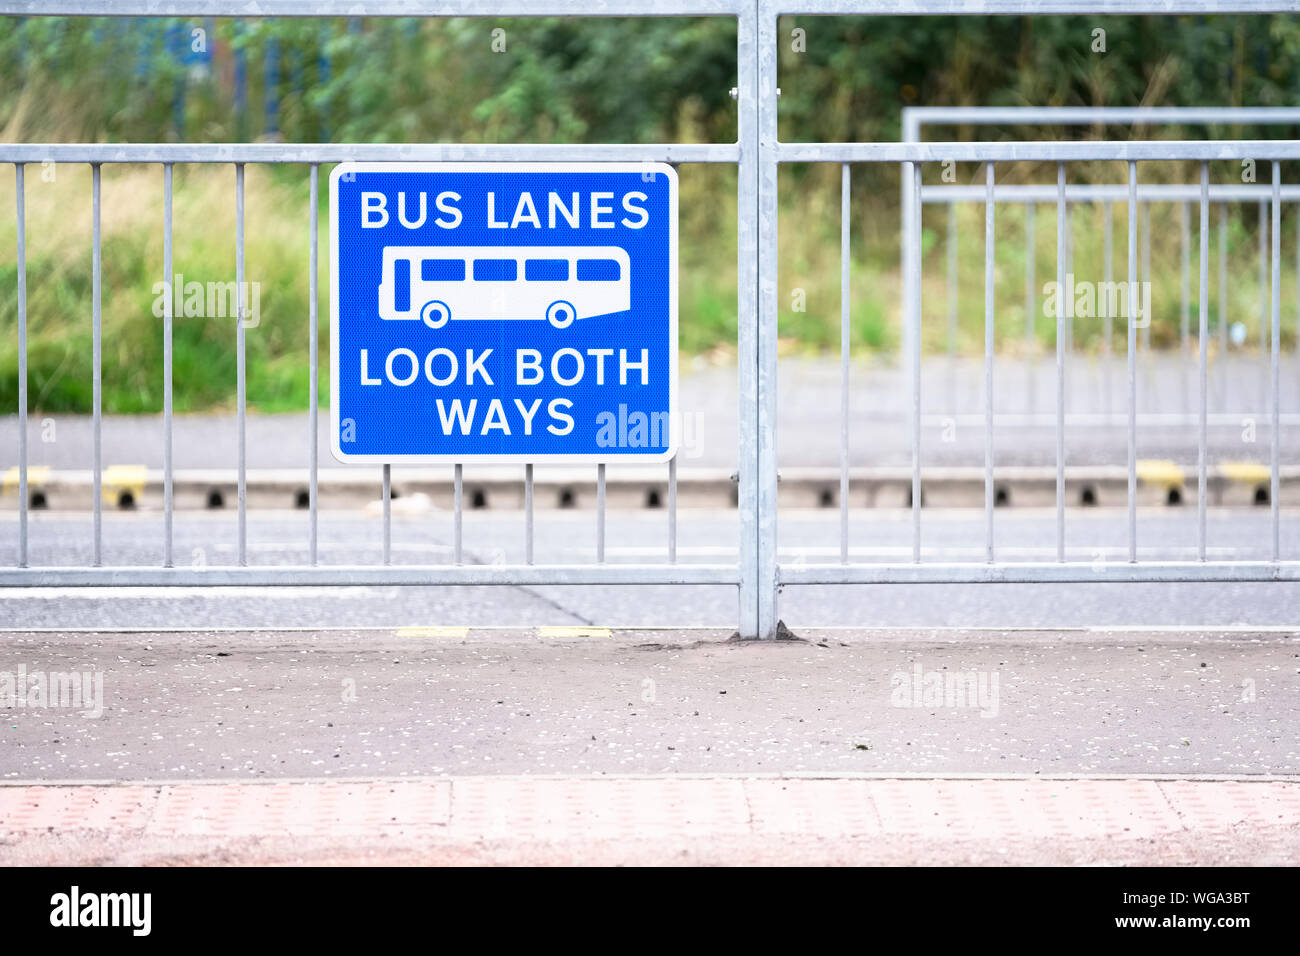 Bus lanes sign in city with look both ways warning Stock Photo